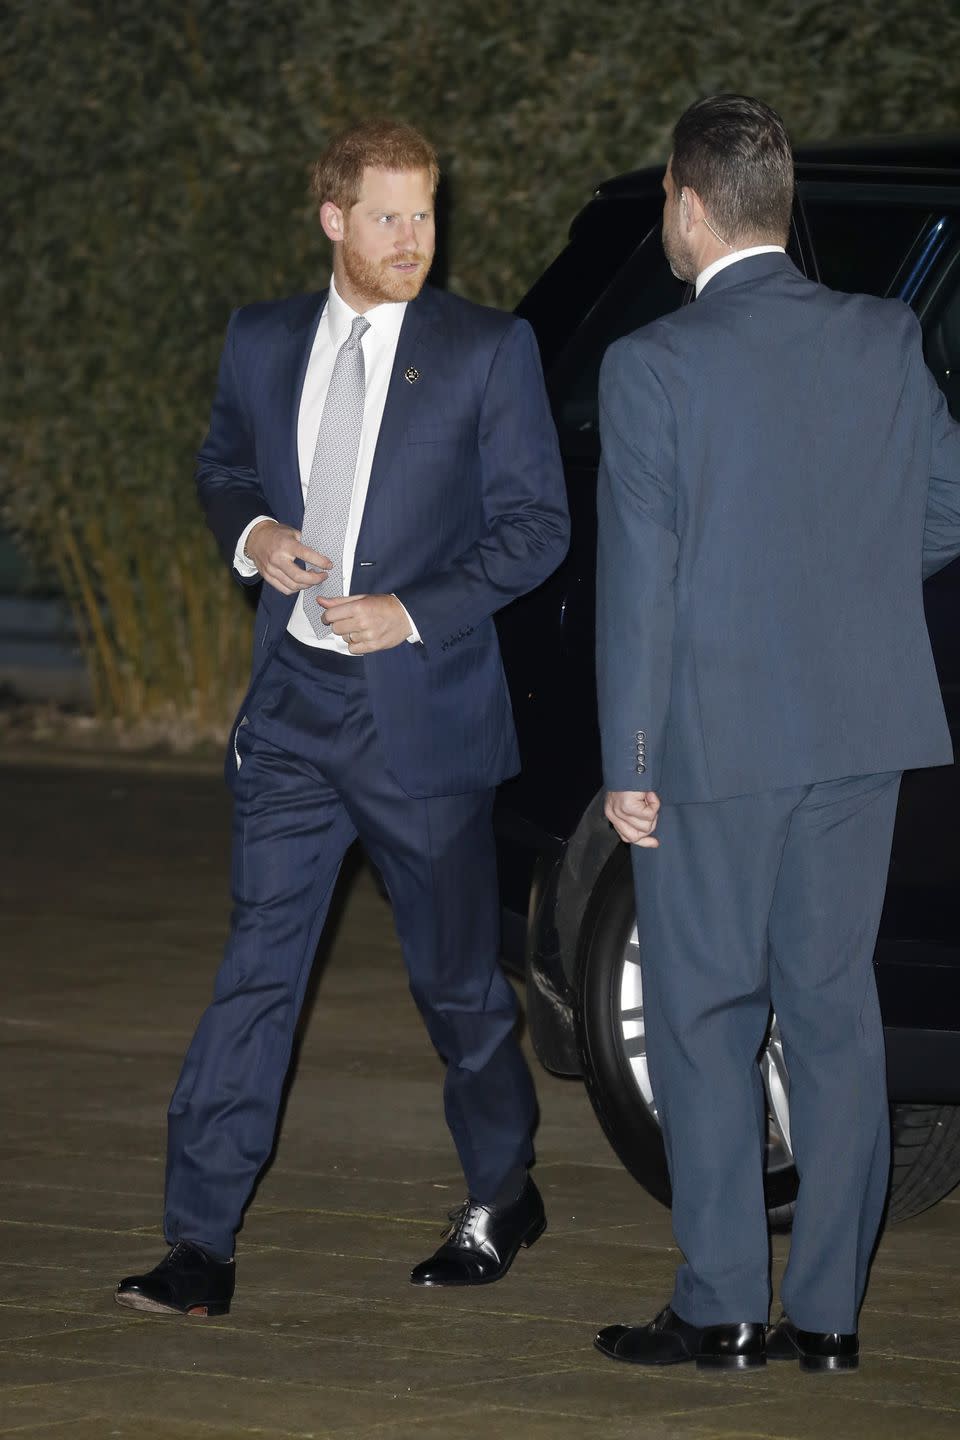 Harry wore a navy suit for the occasion.